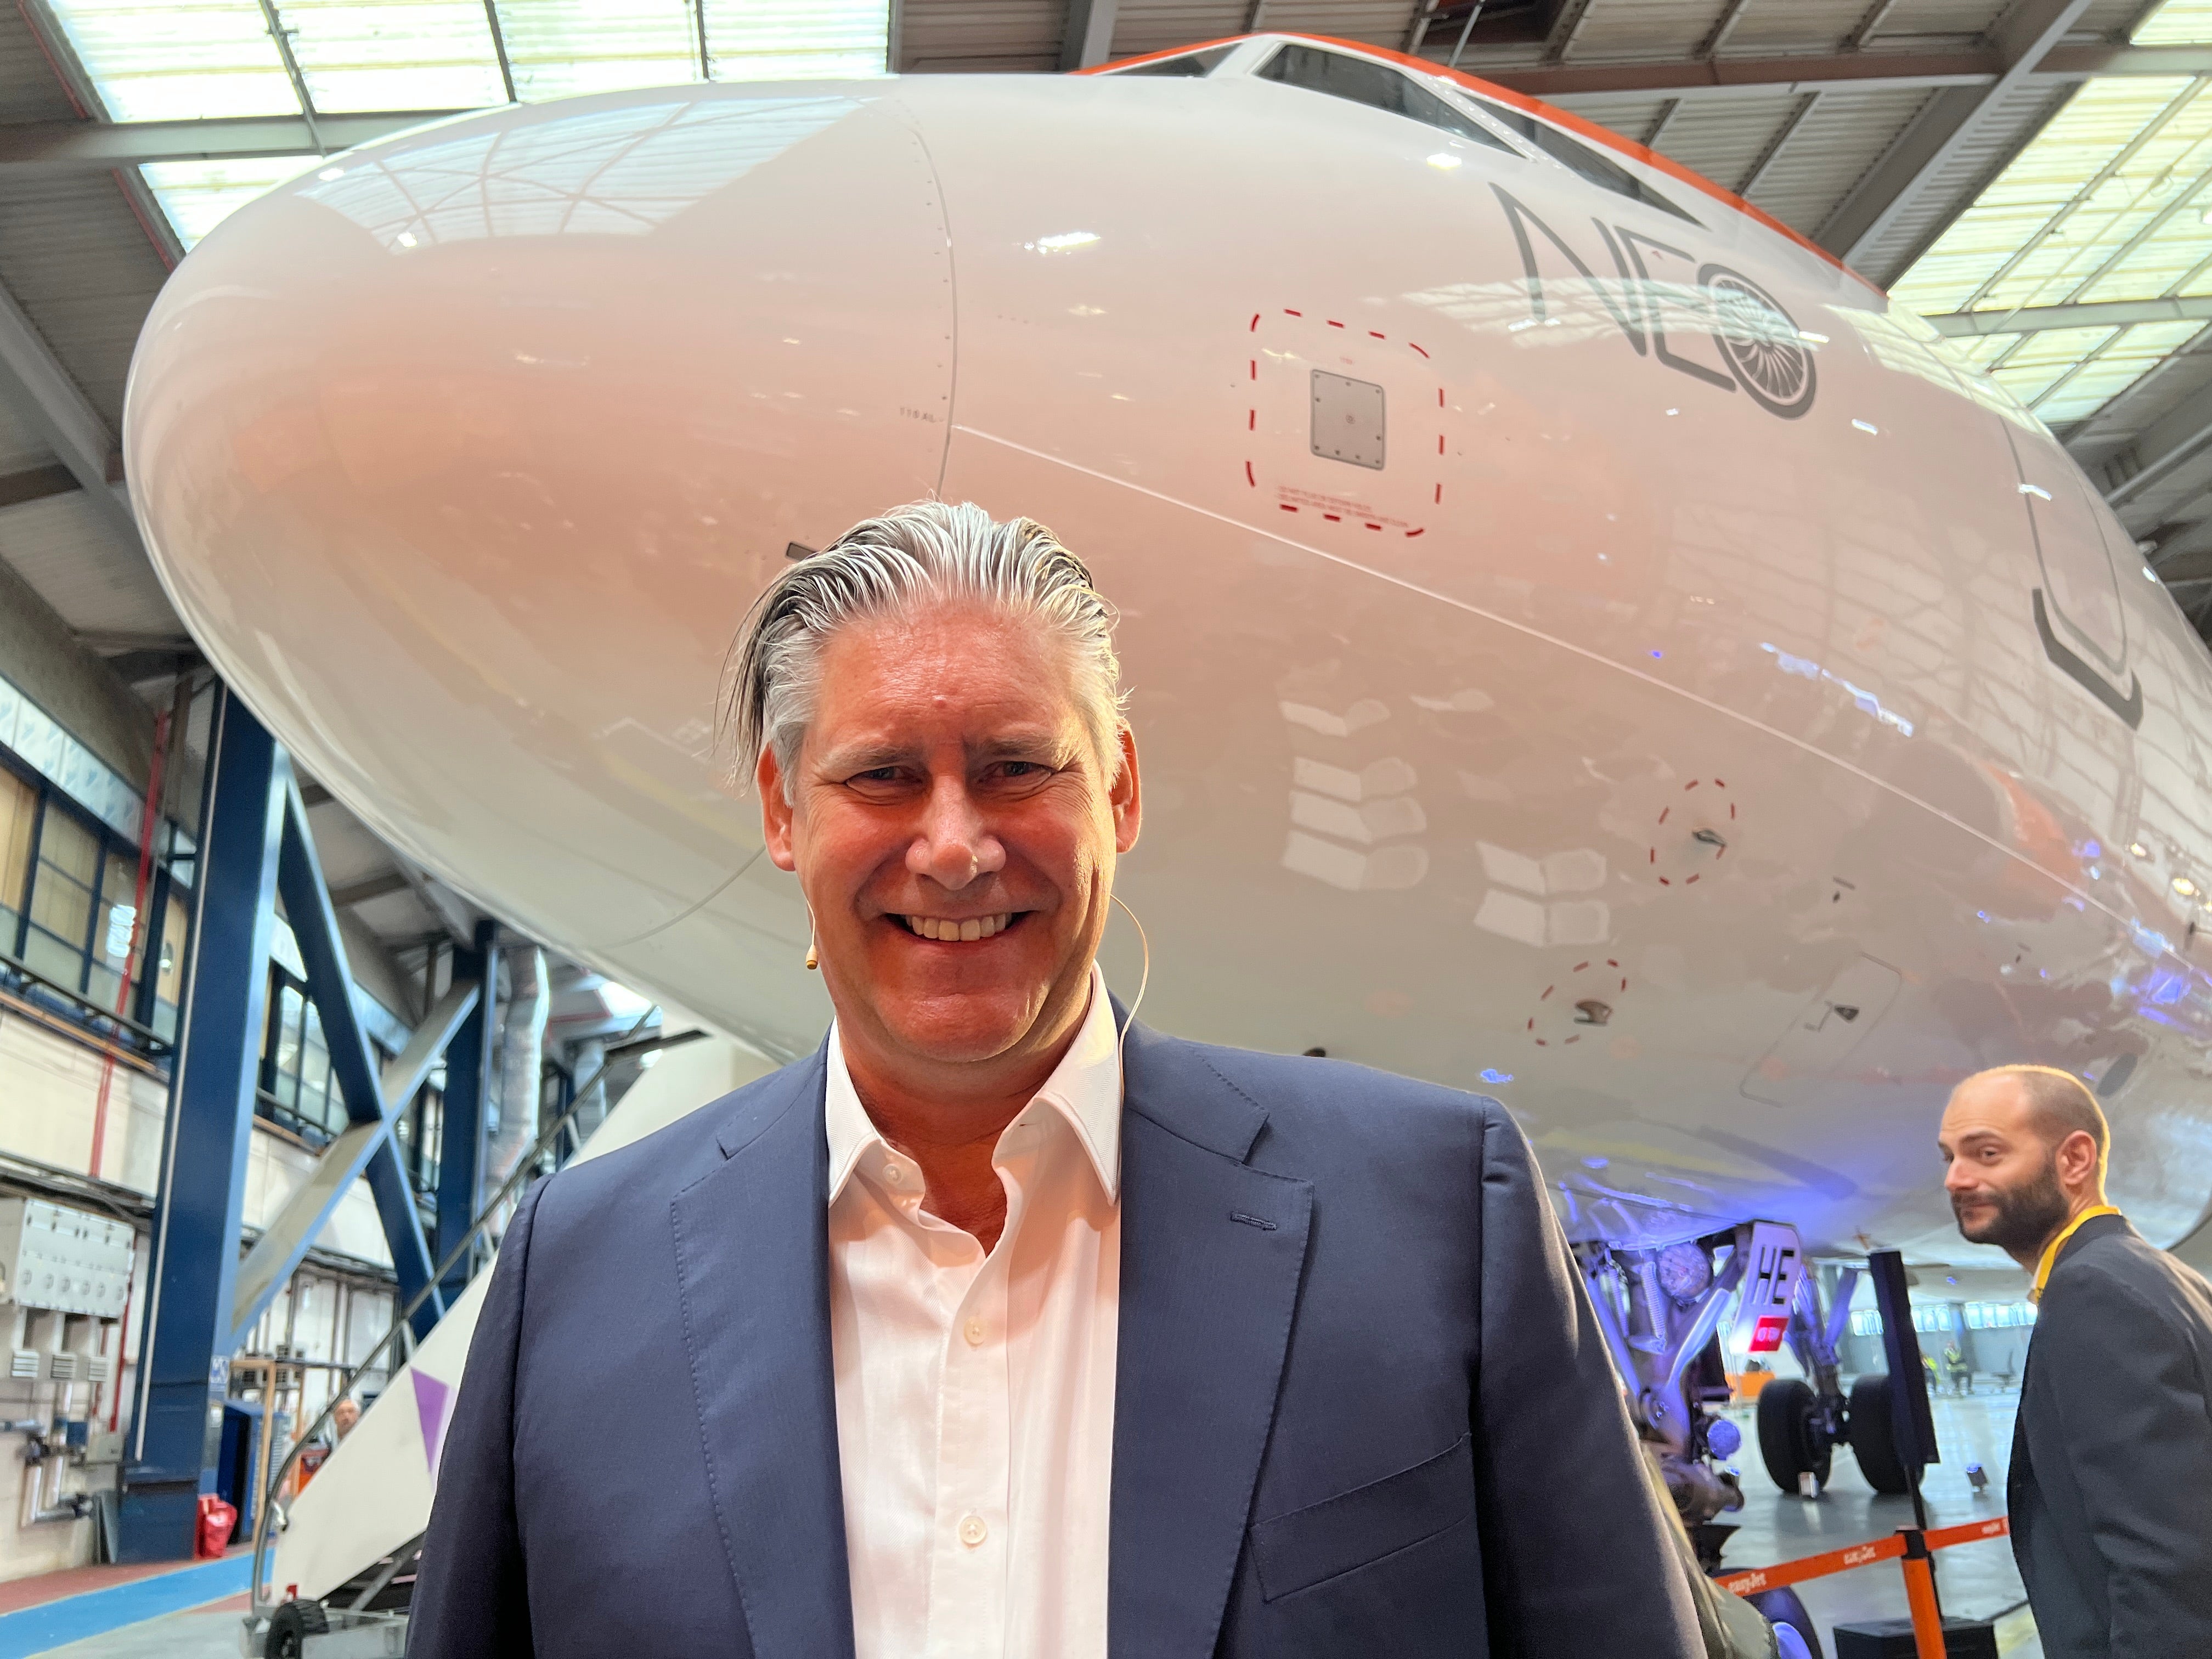 On course: Johan Lundgren, chief executive of easyJet, says the future is looking promising